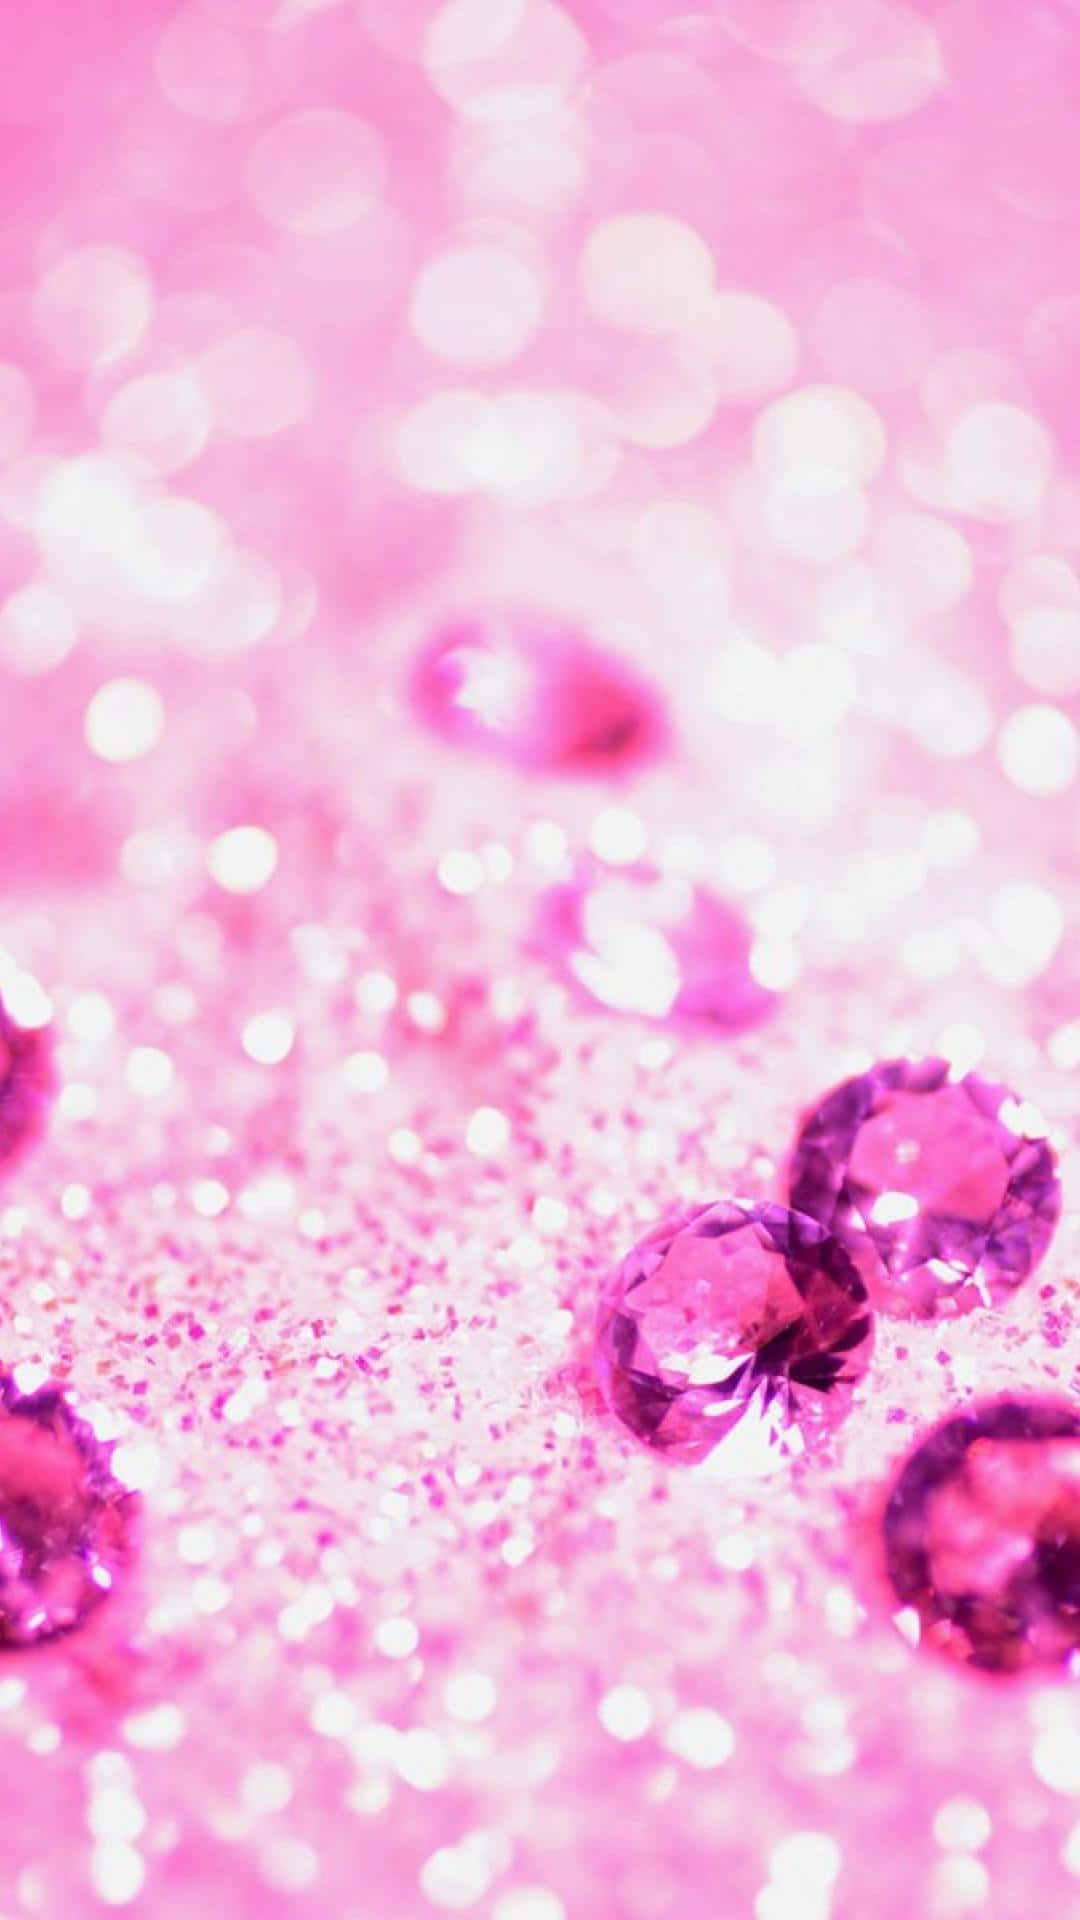 Dreamy Pink Girly Background